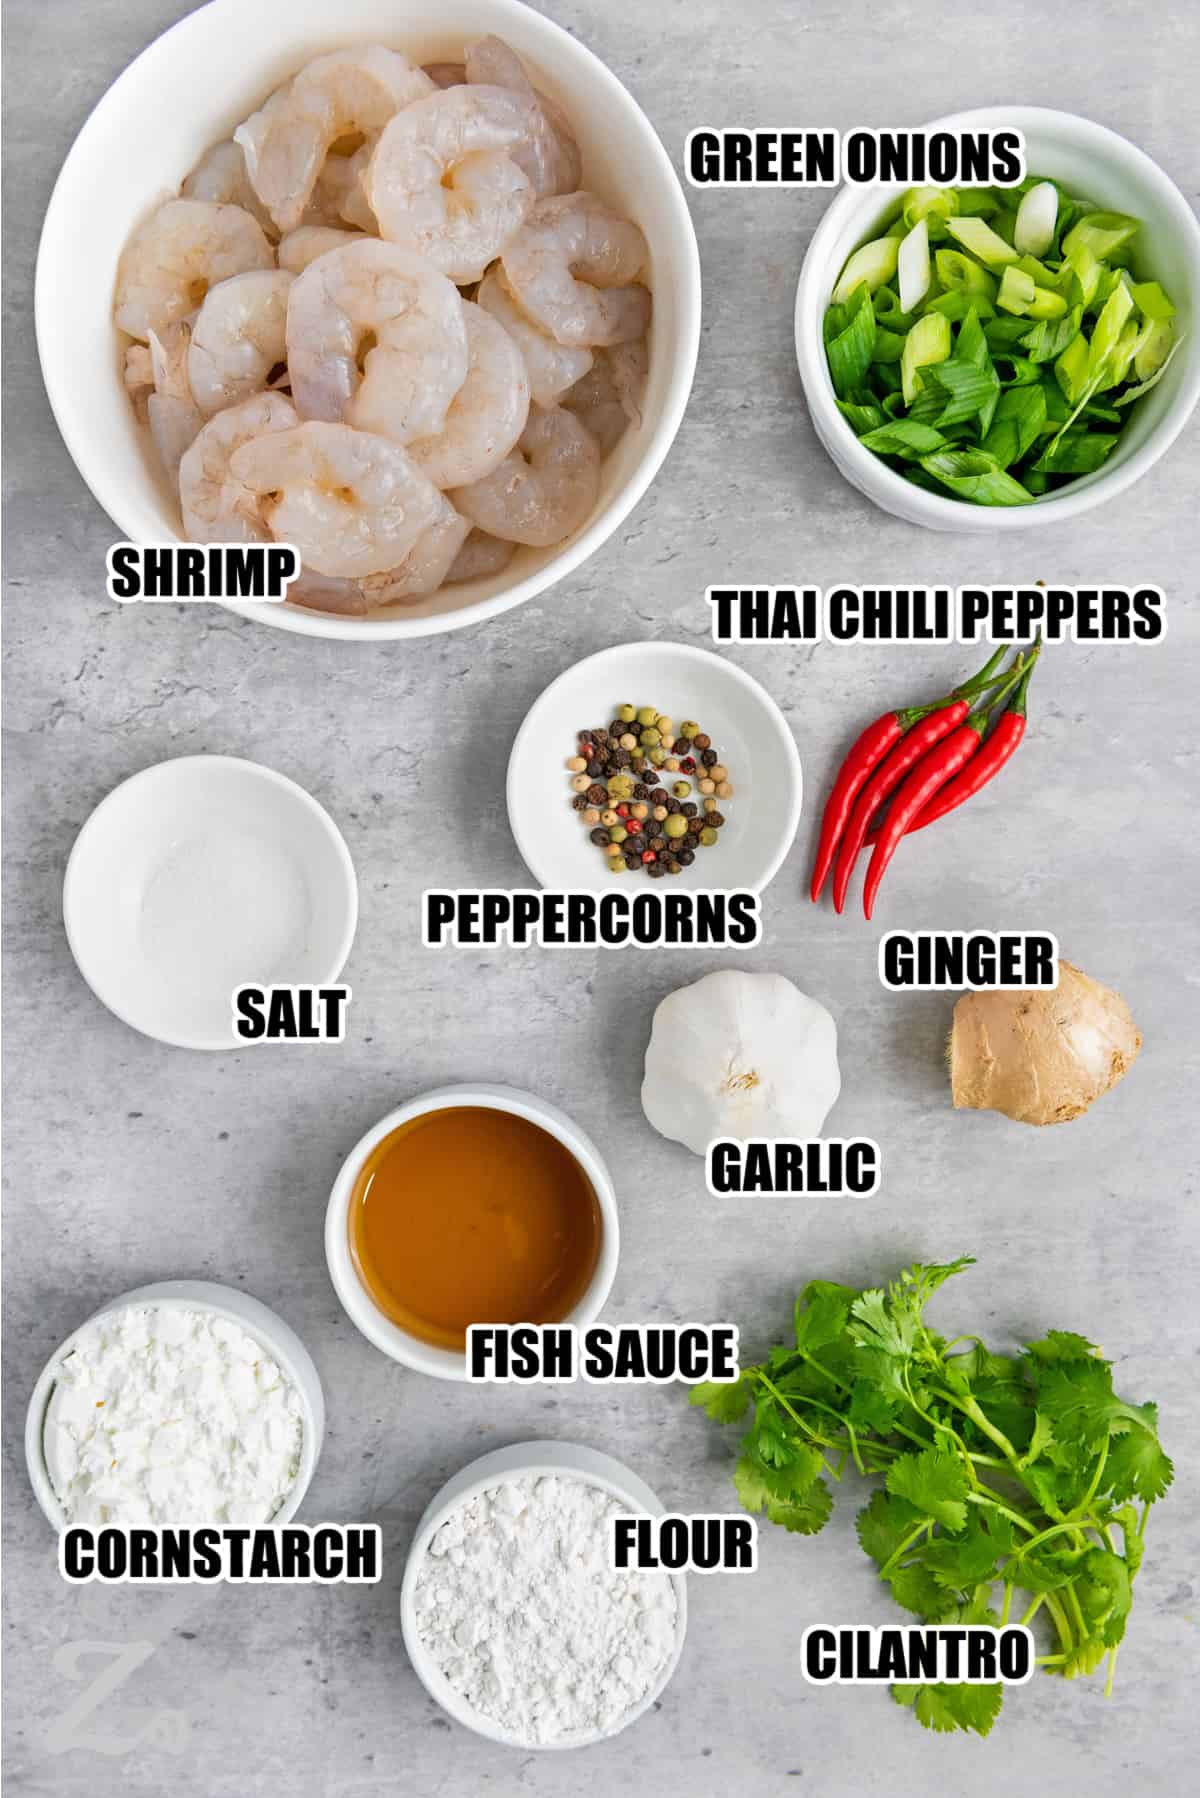 ingredients to make Chinese salt and pepper shrimp labeled: green onions, shrimp, Thai chili peppers, peppercorns, salt, garlic, ginger, fish sauce, cornstarch, flour and cilantro.